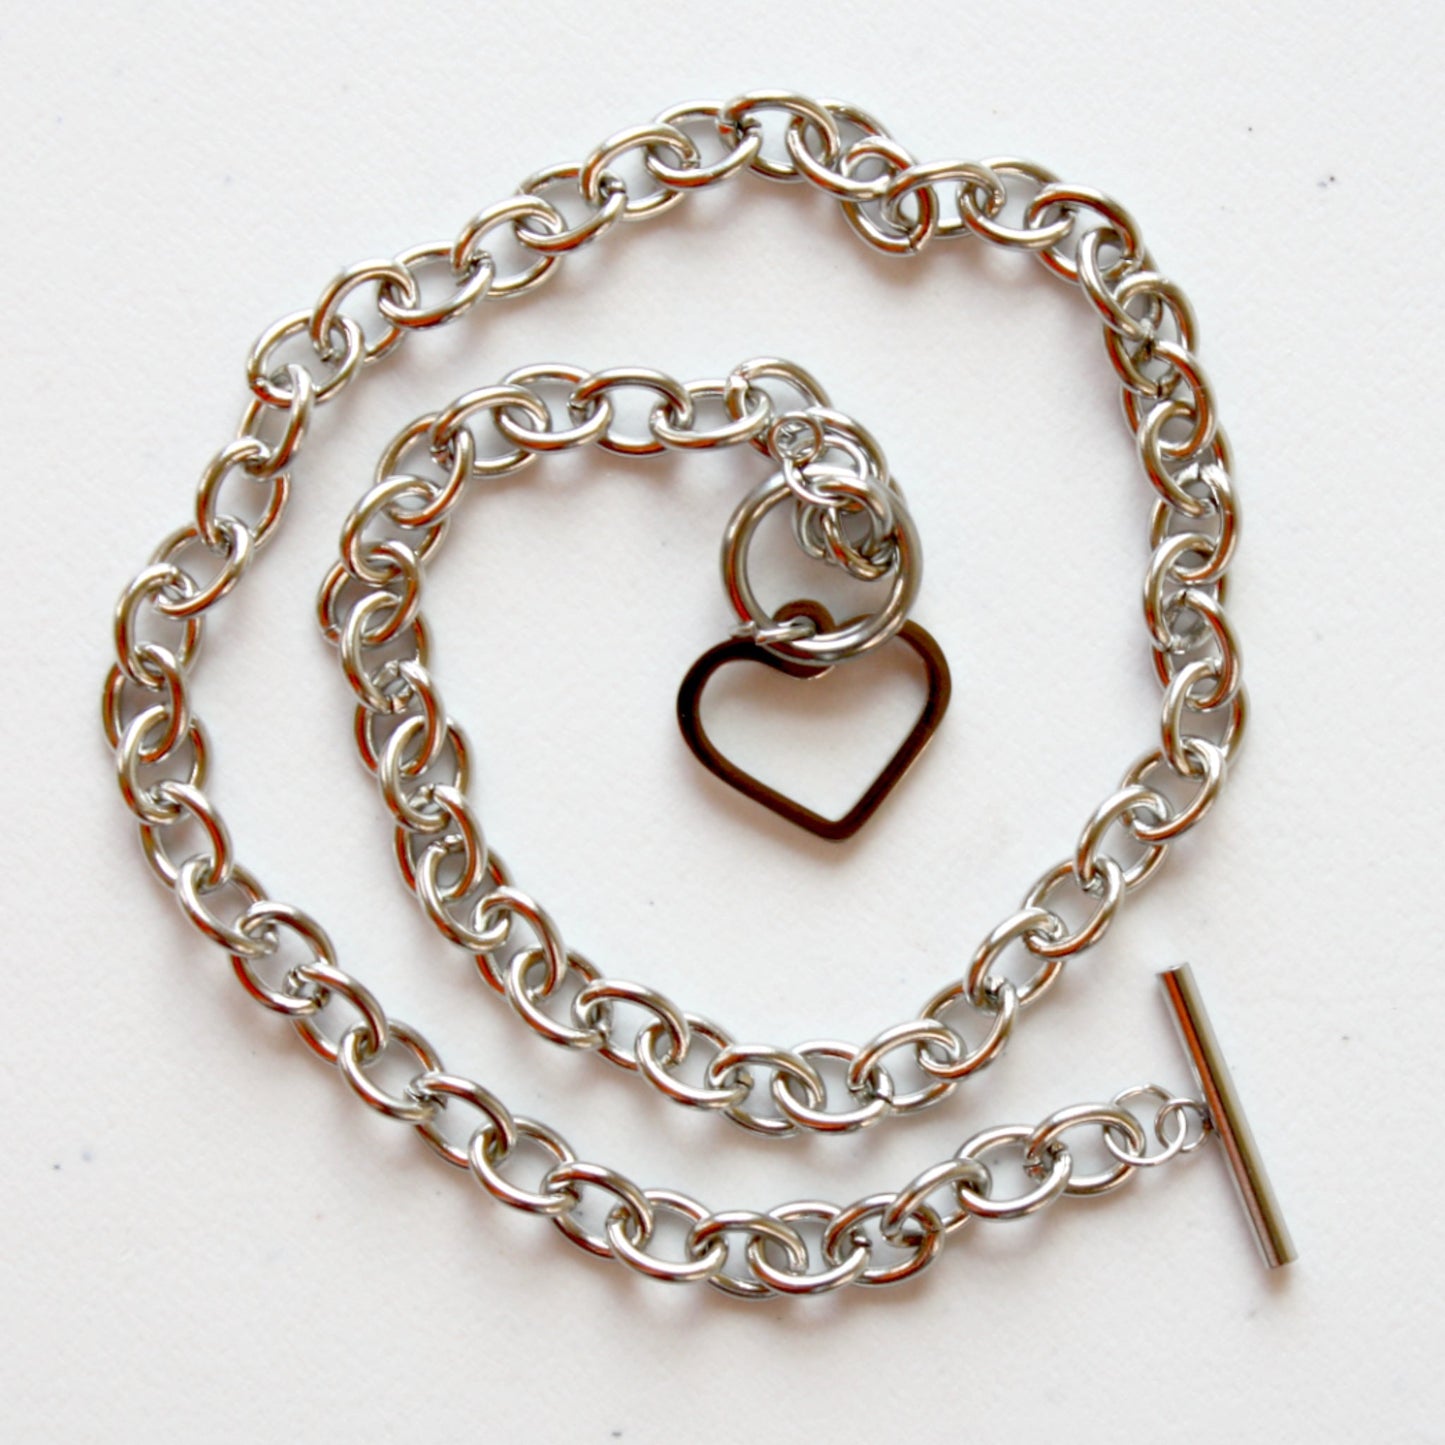 Chain Toggle Heart Necklace - Made in the USA